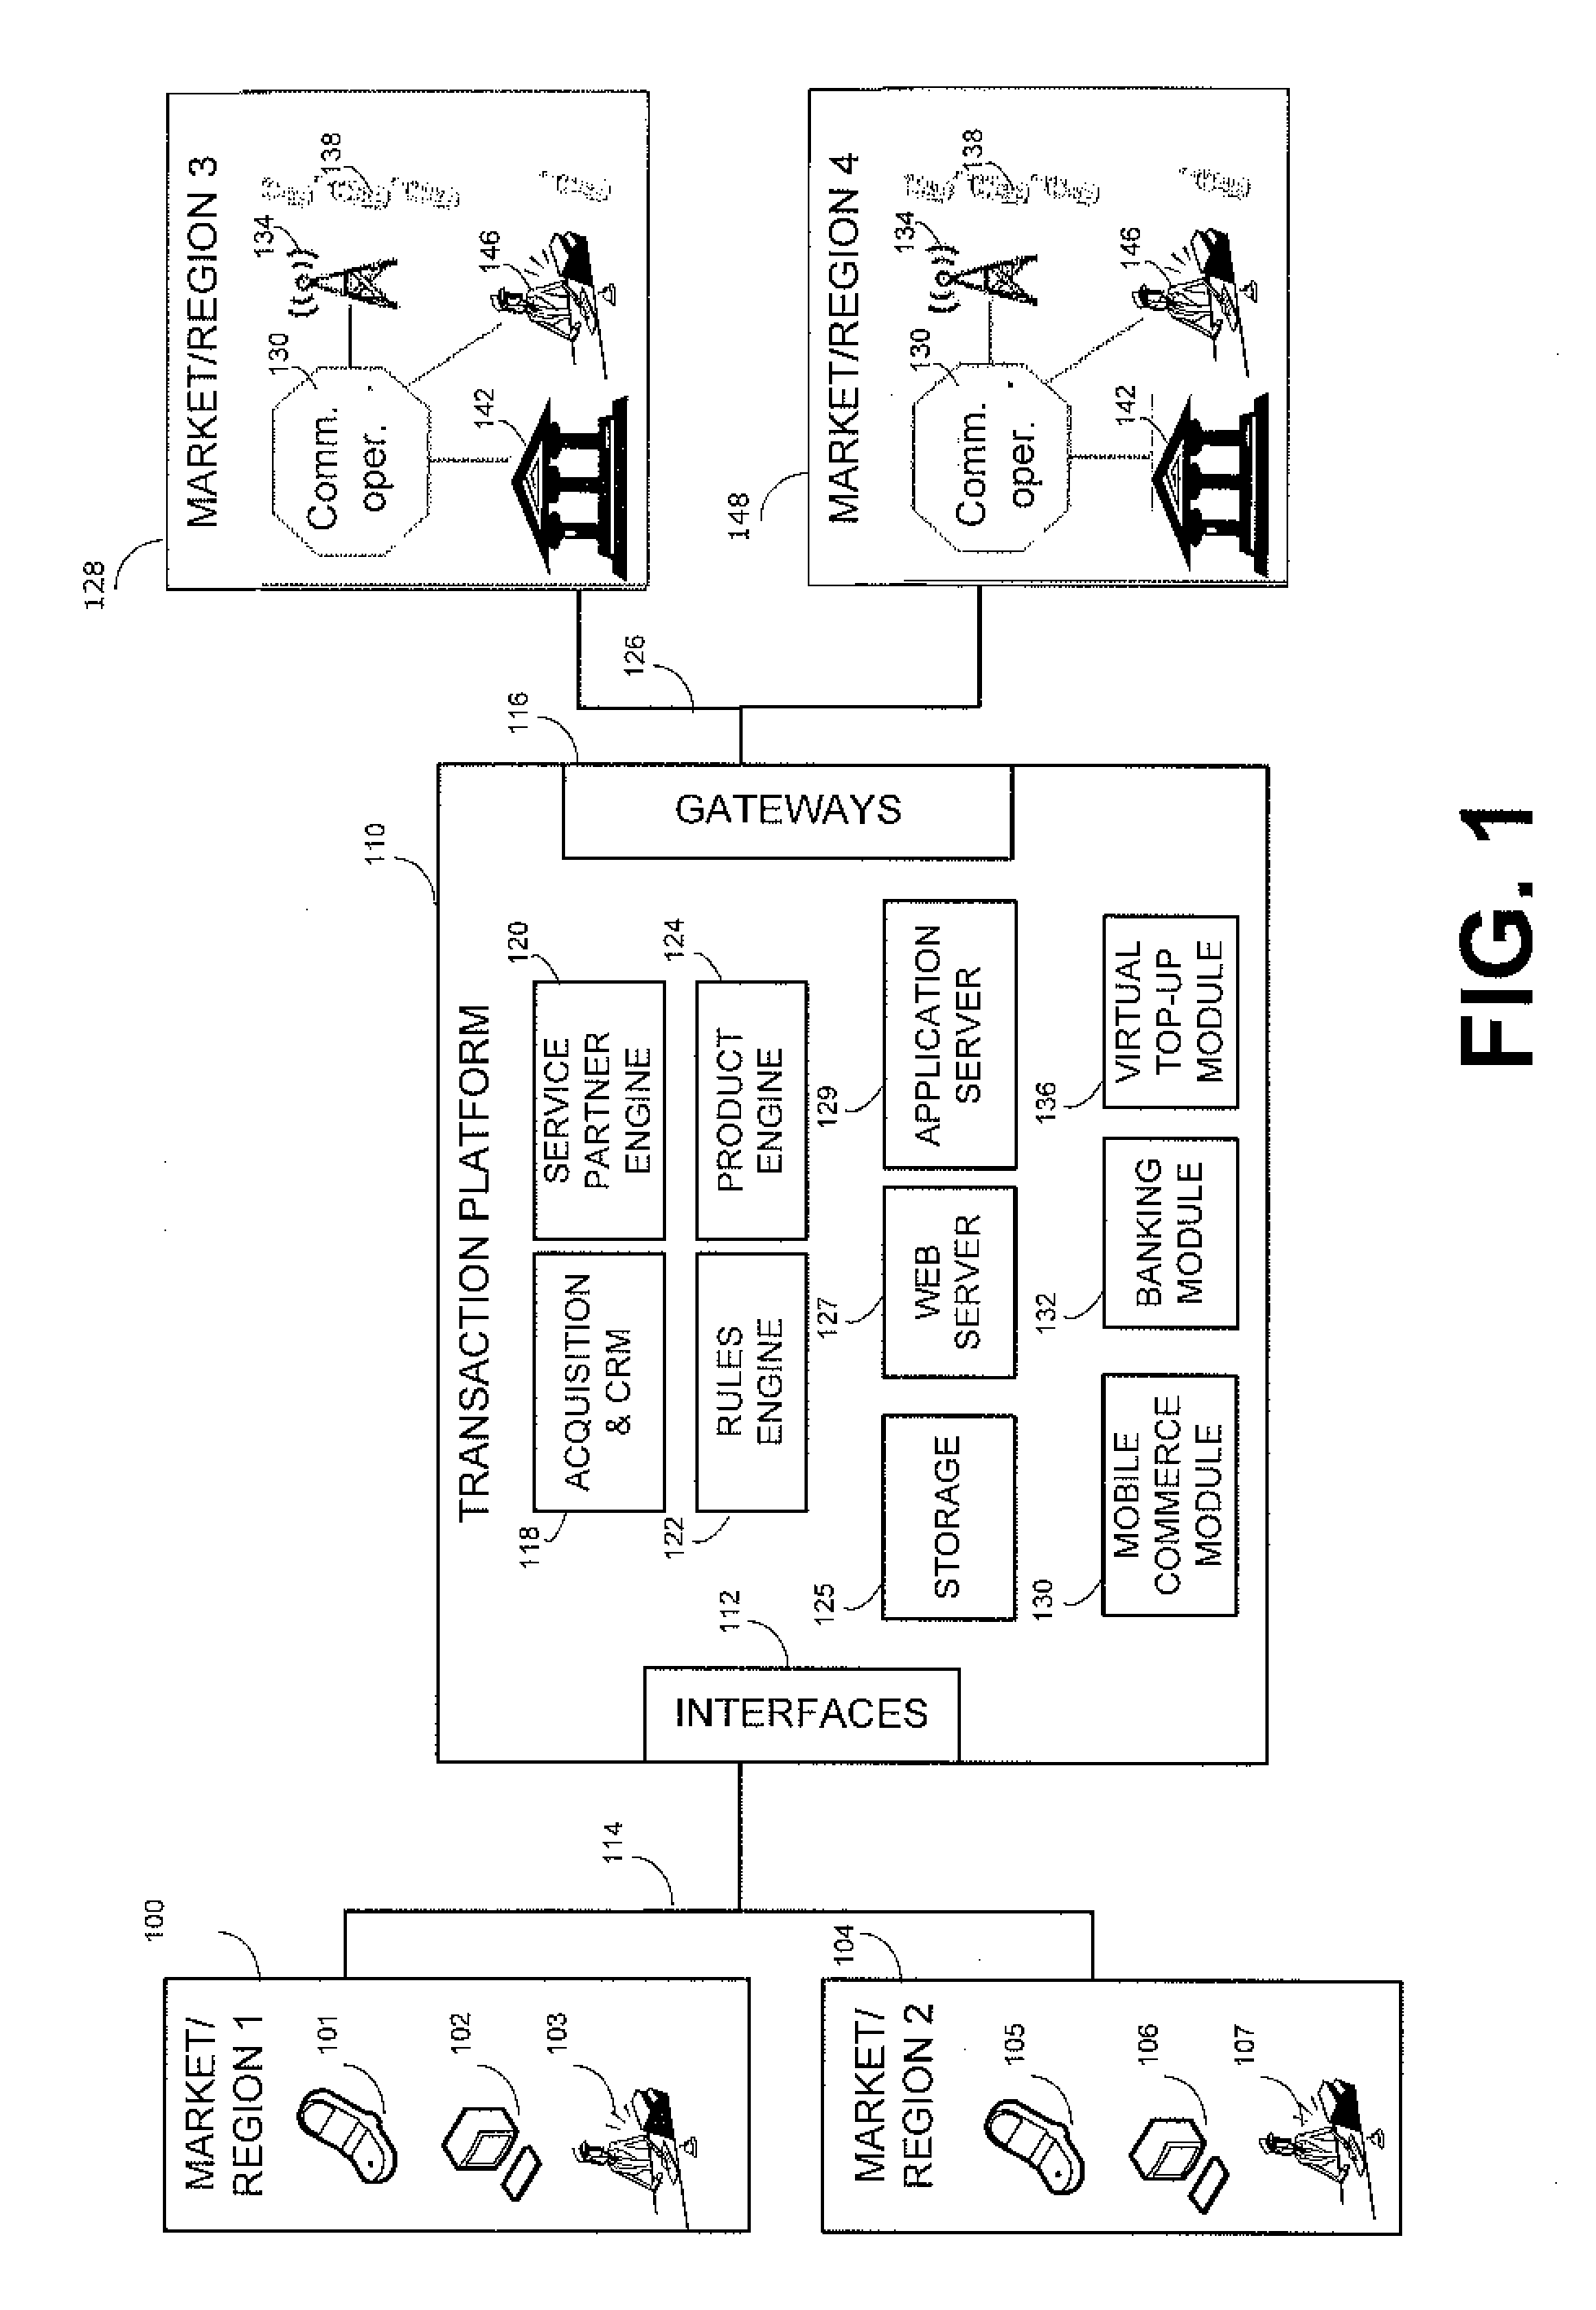 Apparatus and method for facilitating money or value transfer